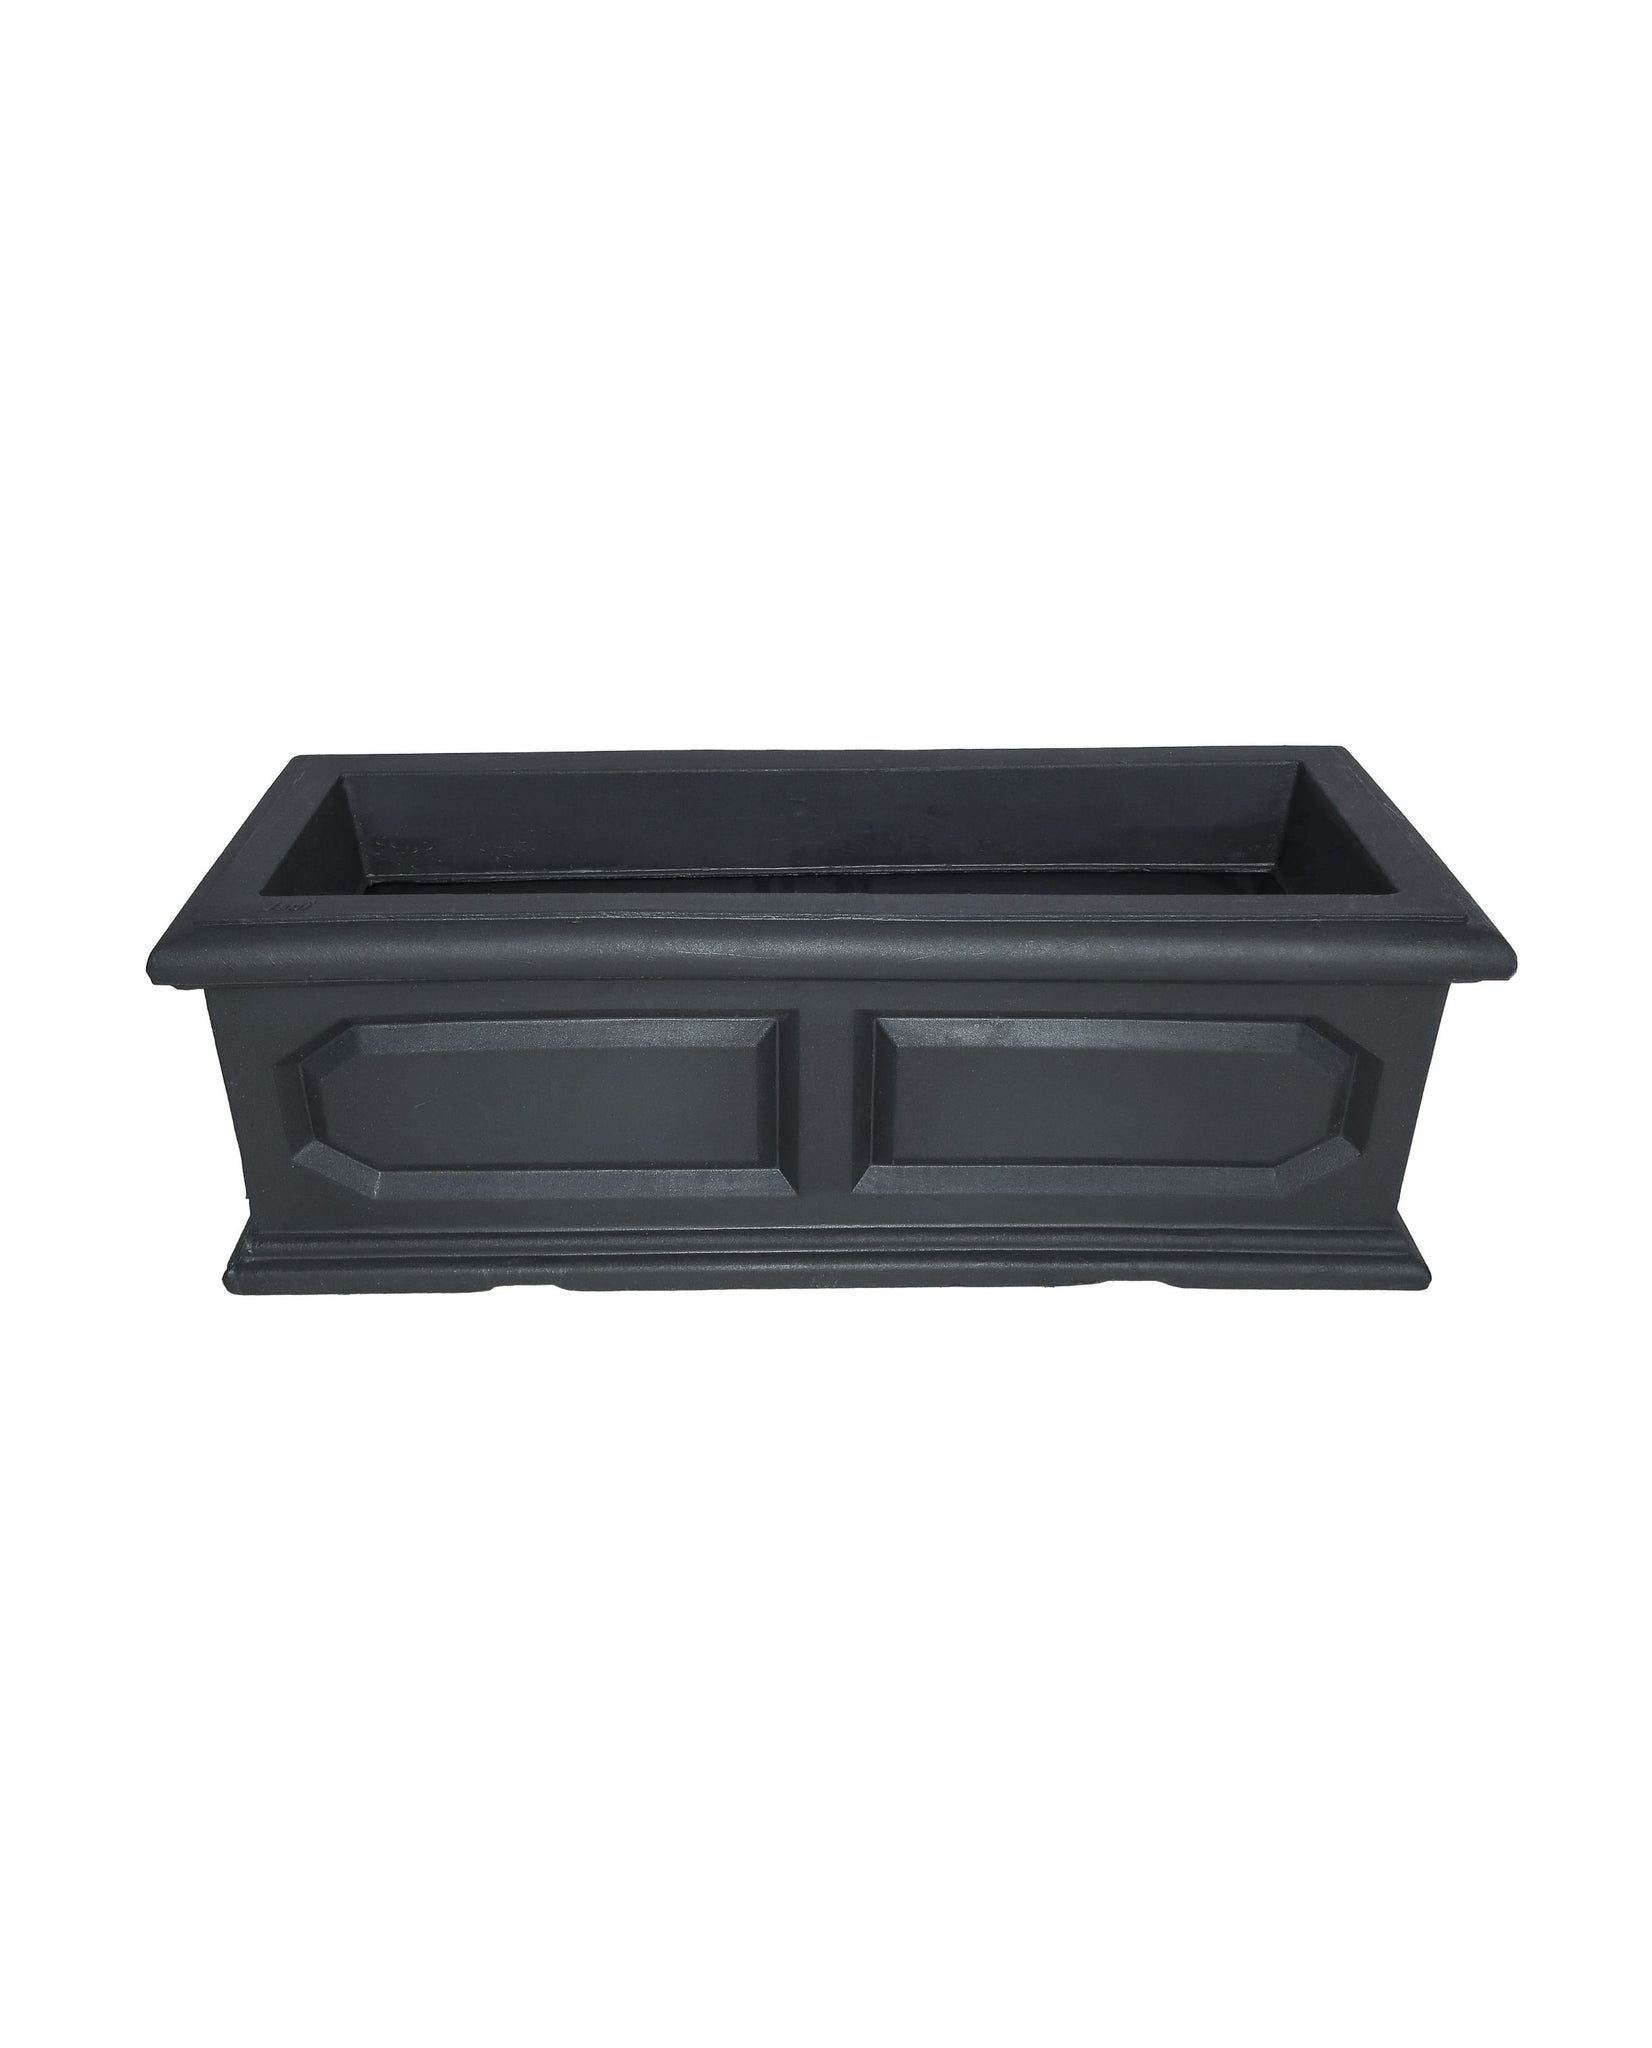 Slight angled view of the classic versailles window box with the rectangular shape and classic style. colour lead (black)